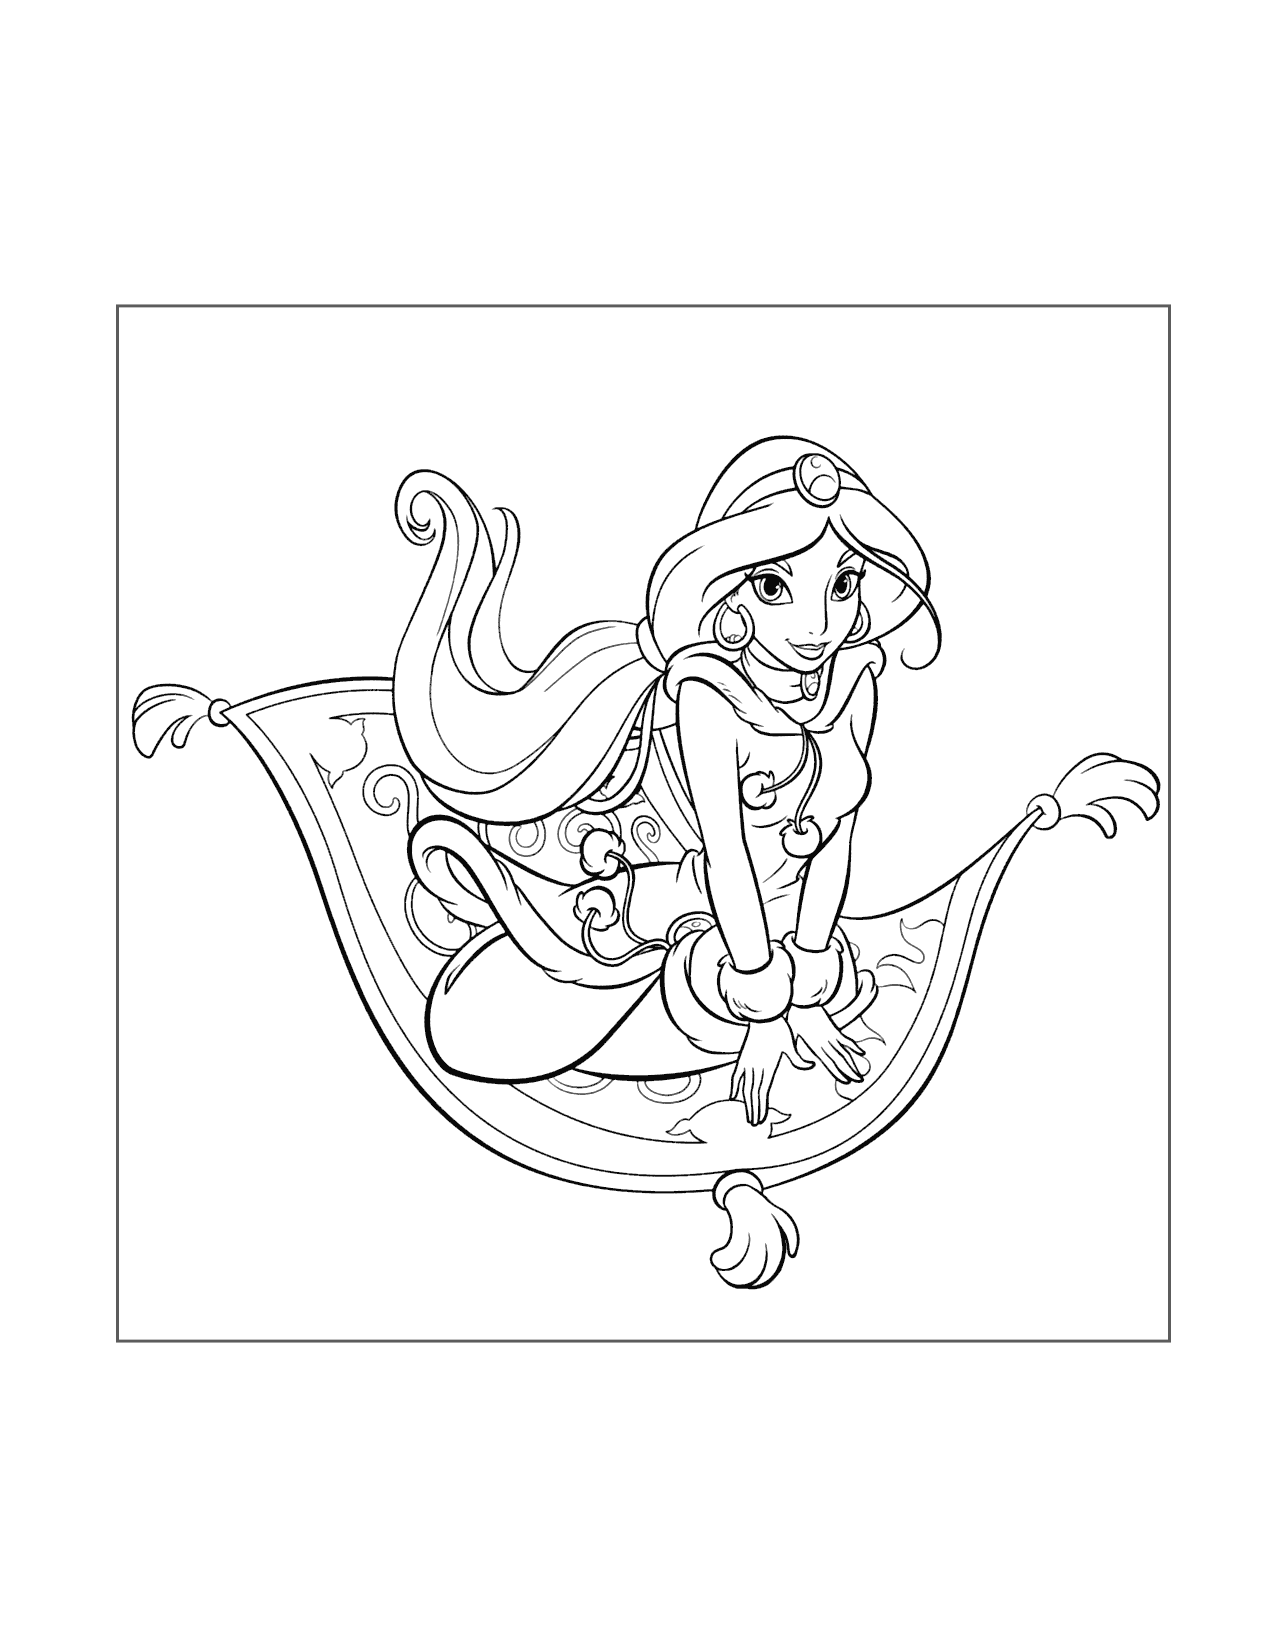 Jasmine And Magic Carpet Coloring Page